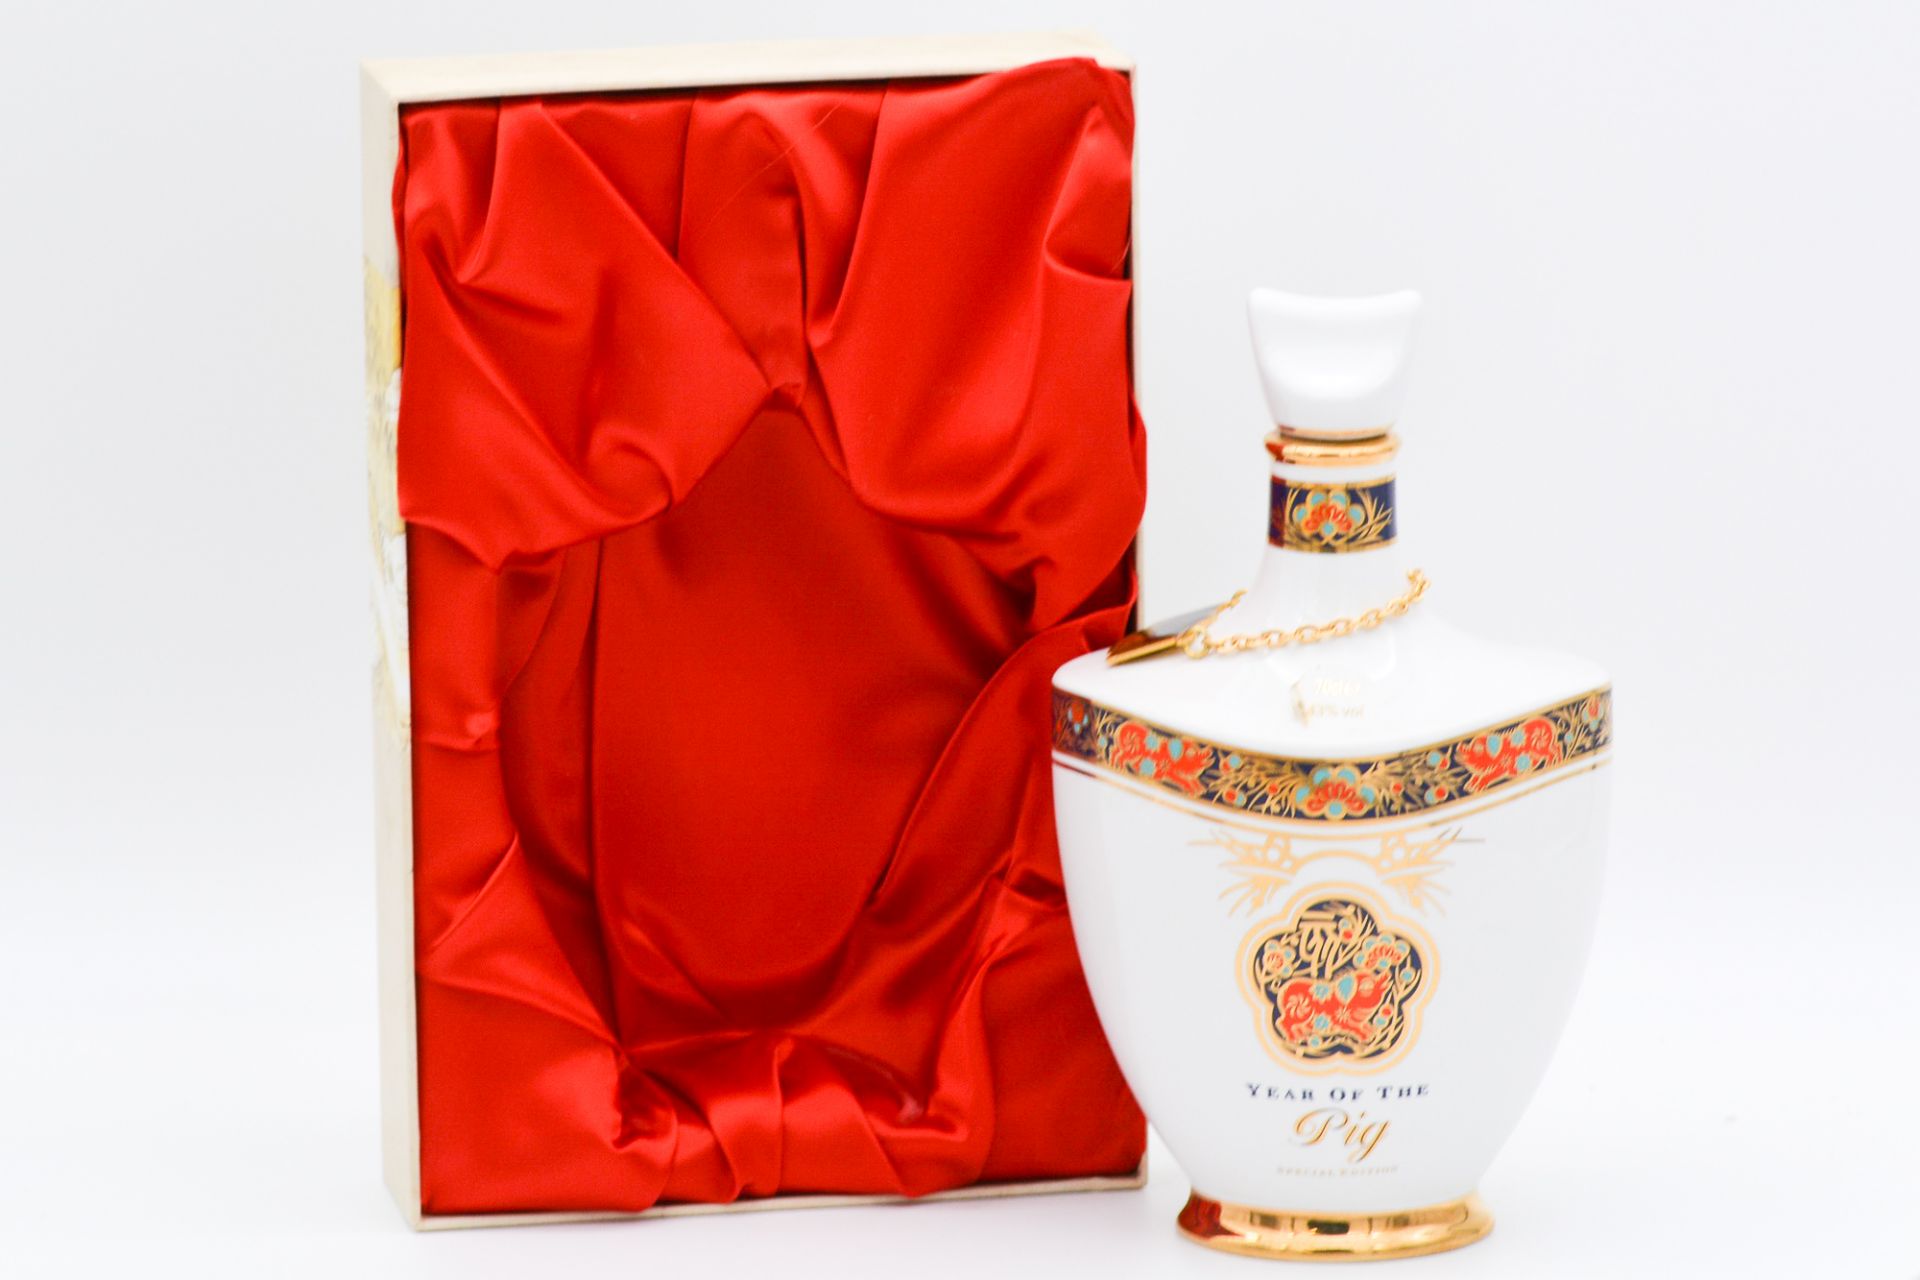 Langs Select Founders Reserve Scotch whisky, Year of the Pig, Special Edition Decanter - Image 2 of 2